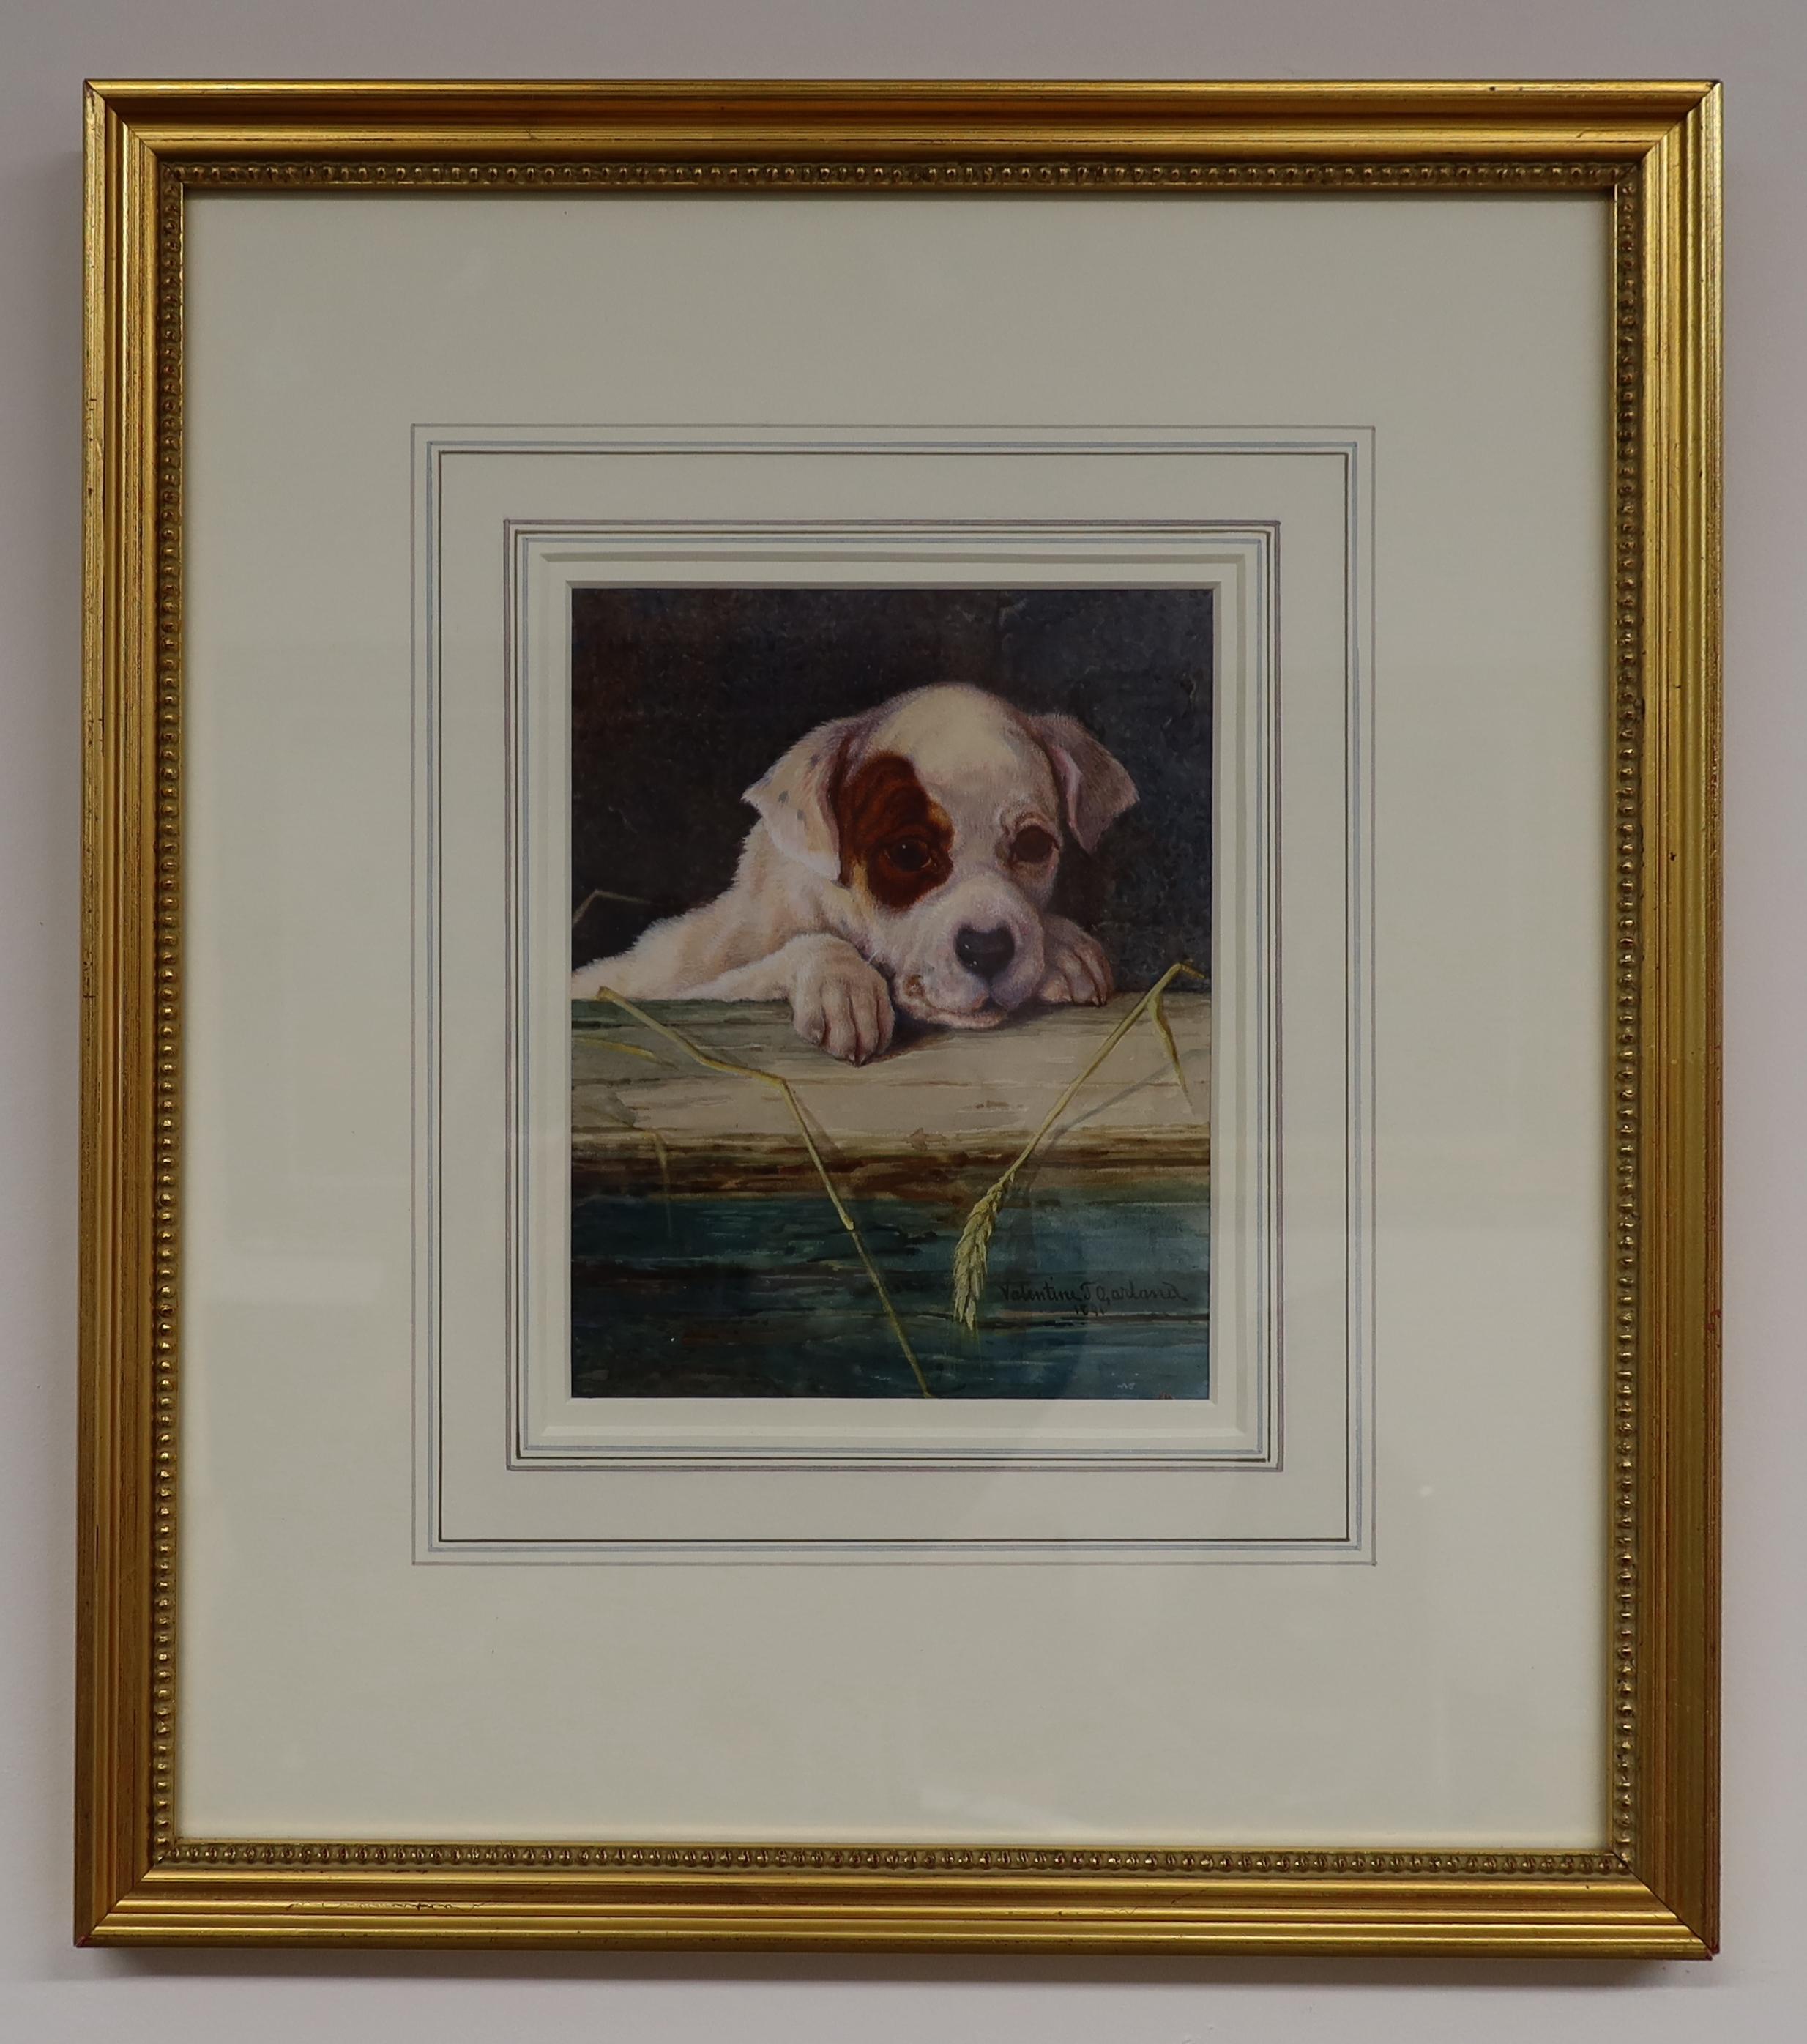 Valentine Thomas Garland, R.A., R.B.A., R.I., R.O.I., R.S.A. (1868 - 1914)
INQUISITIVE
Signed and dated 1891, lower right.
Watercolour and body colour
Frame H. 45cm. x W. 39cm.
Image H 19cm. x W. 15cm.

The watercolour depicts a puppy looking